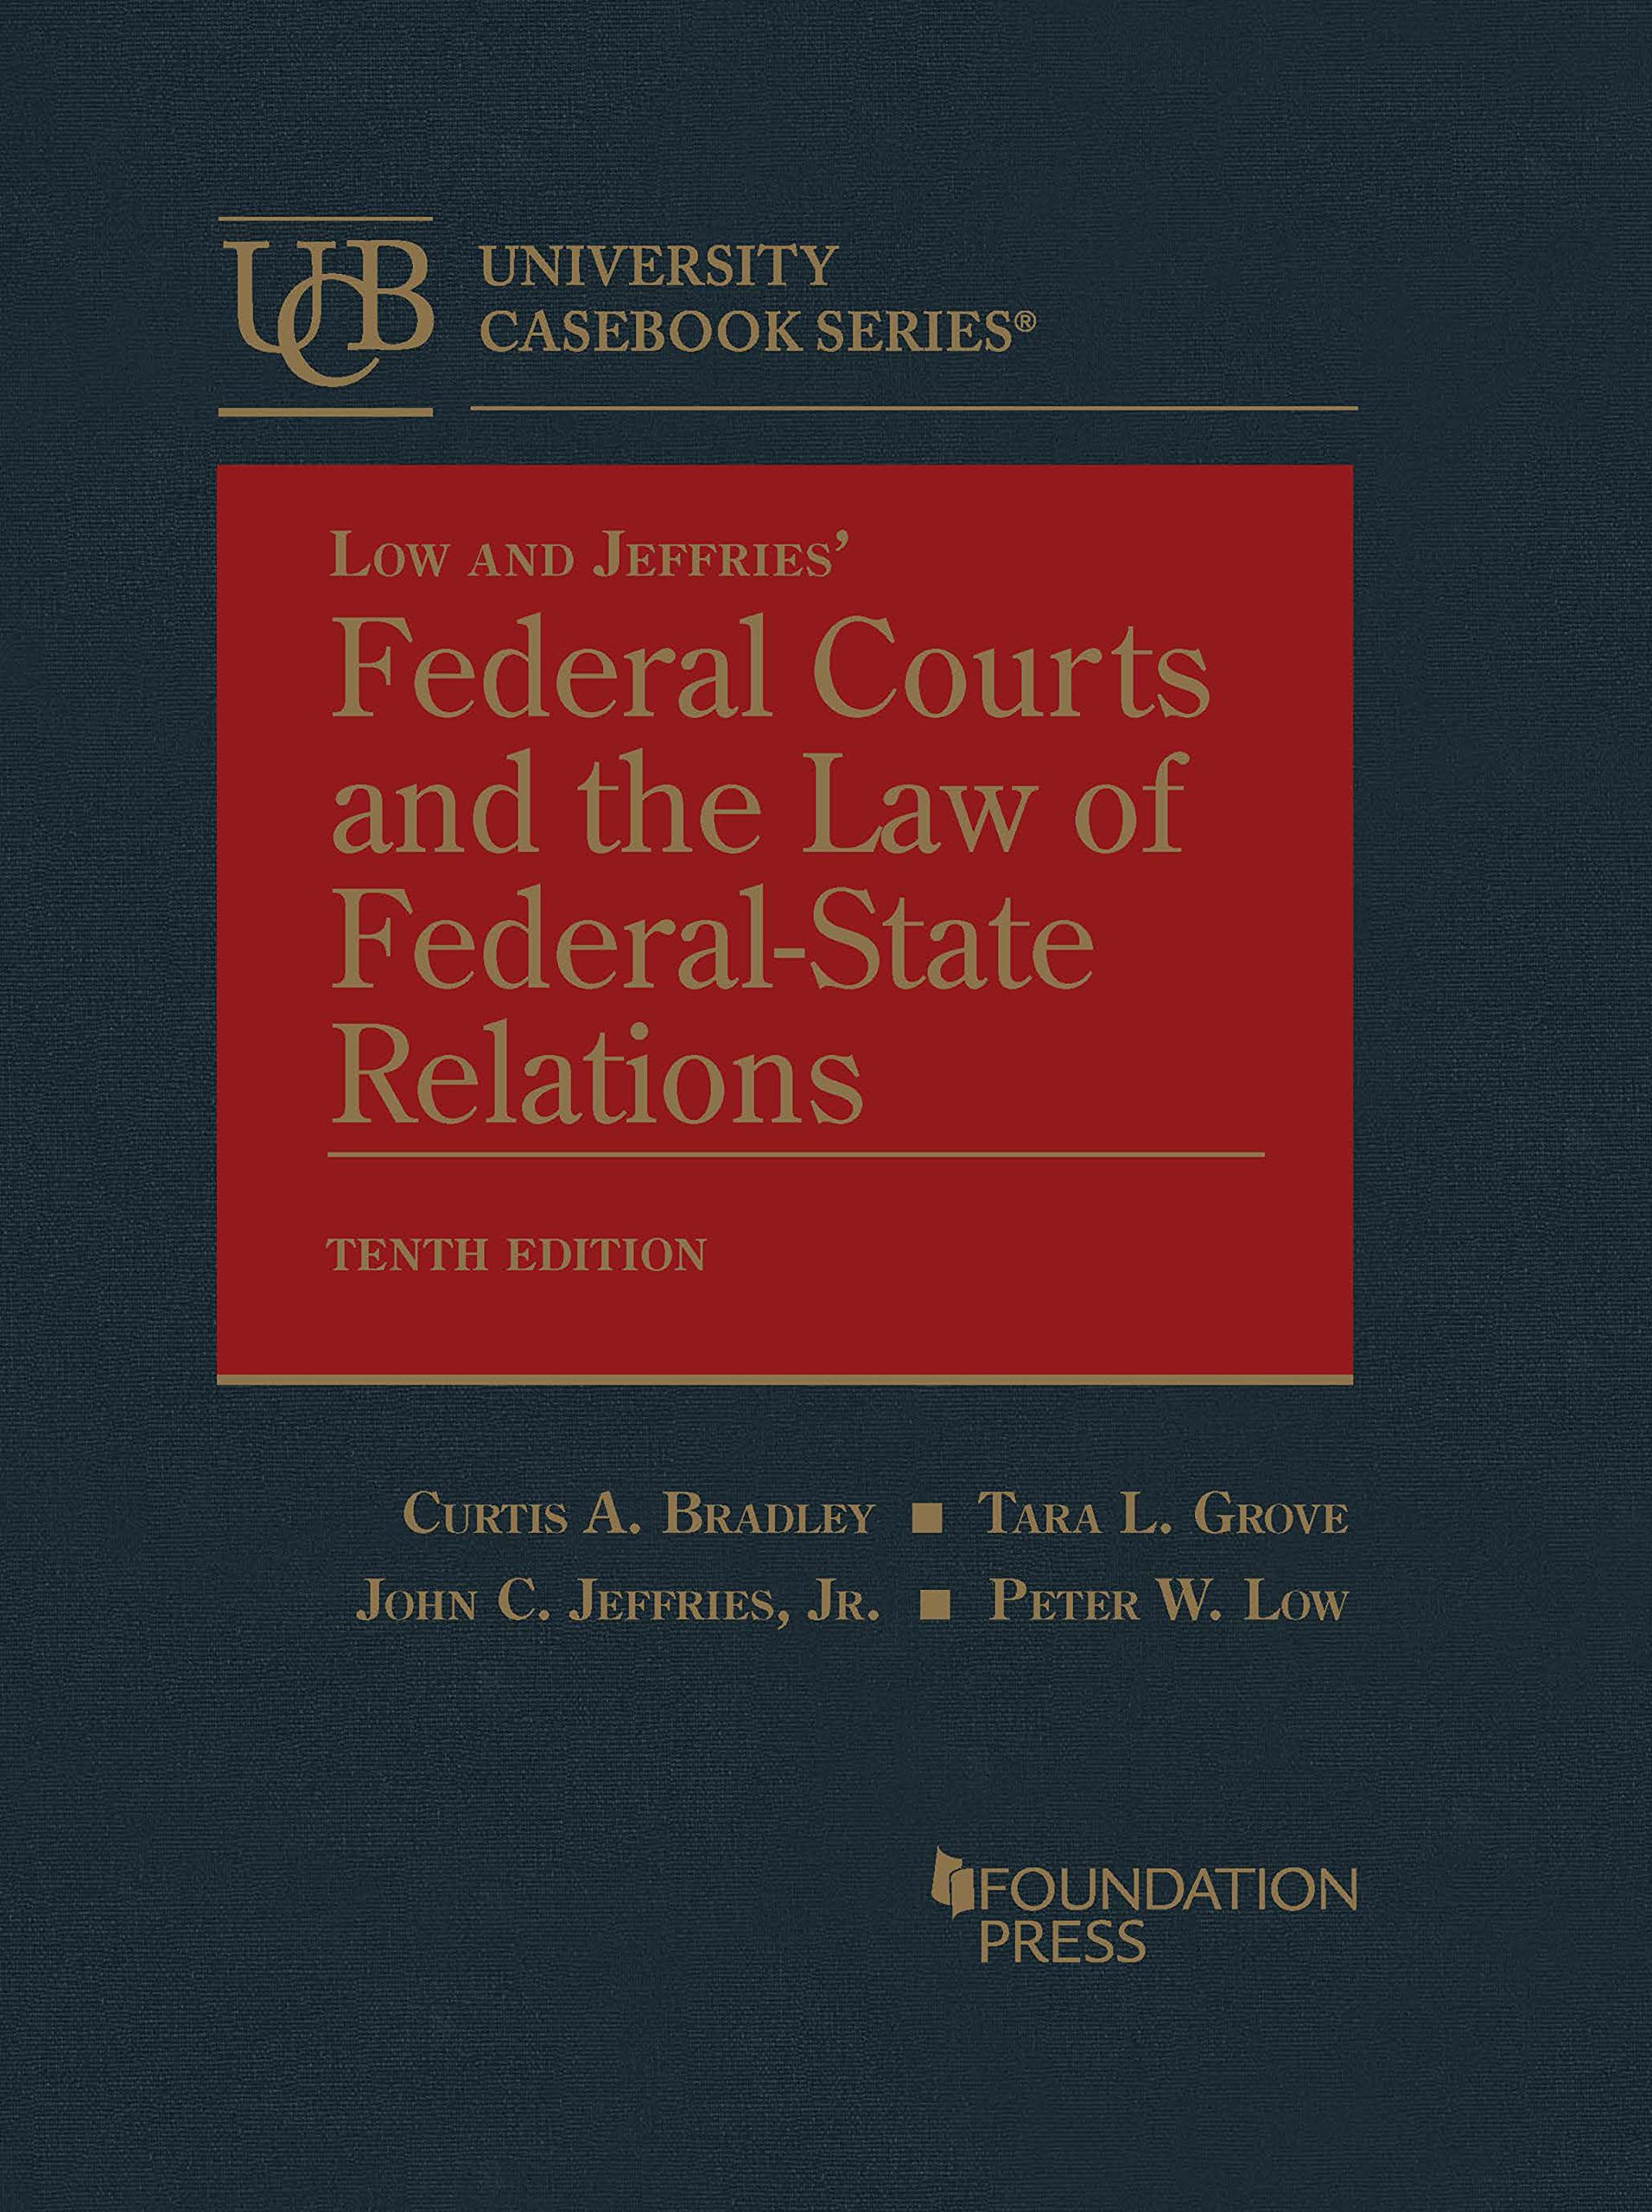 Federal Courts and the Law of Federal-State Relations 10th Edition by  Curtis Bradley